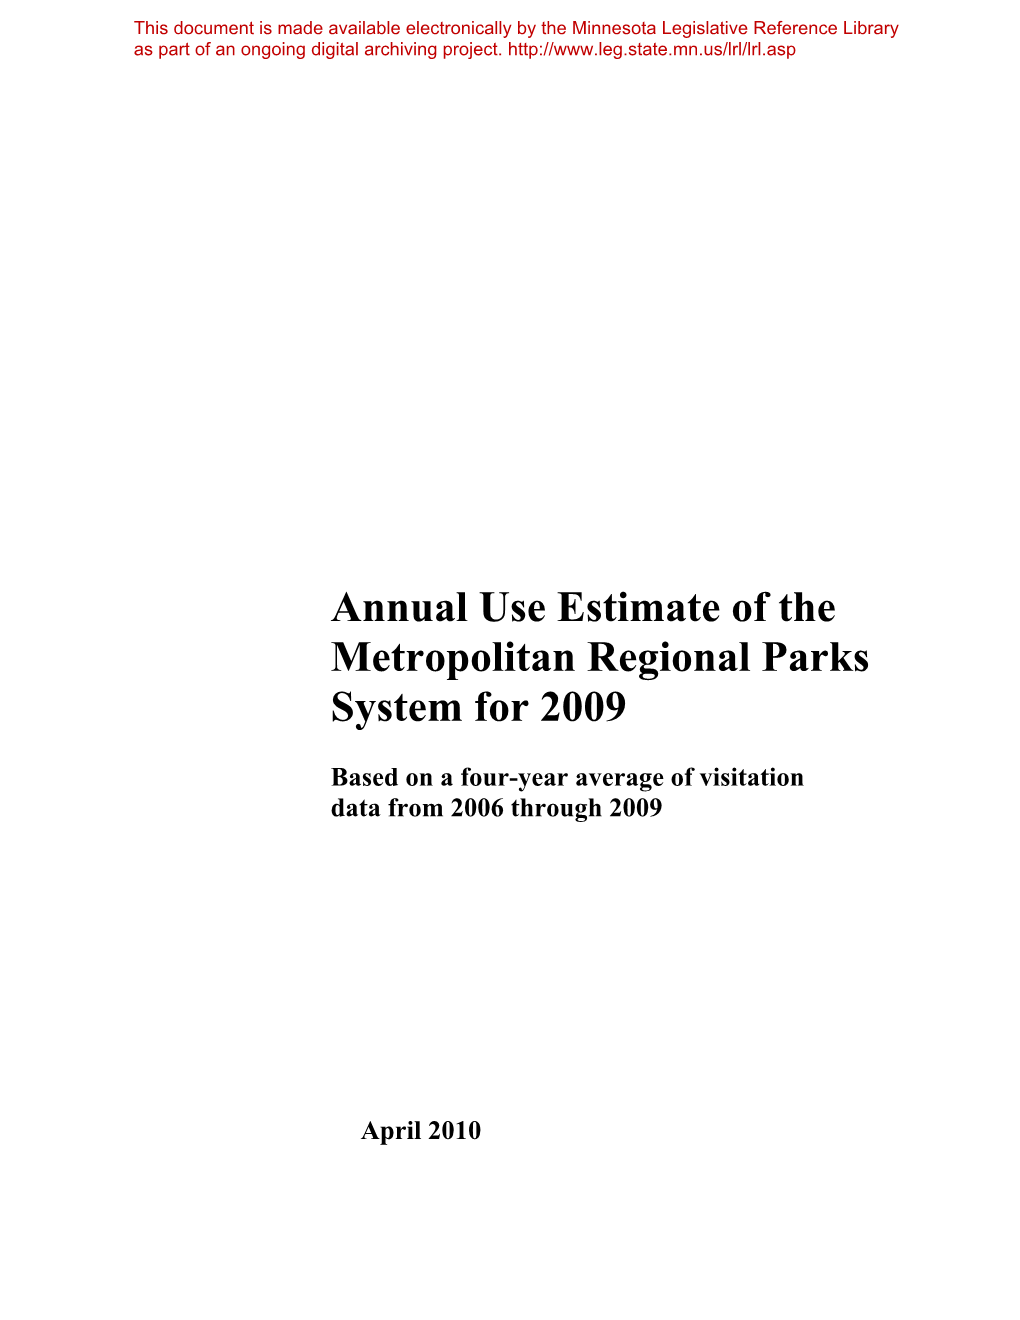 Annual Use Estimate of the Metropolitan Regional Parks System for 2009